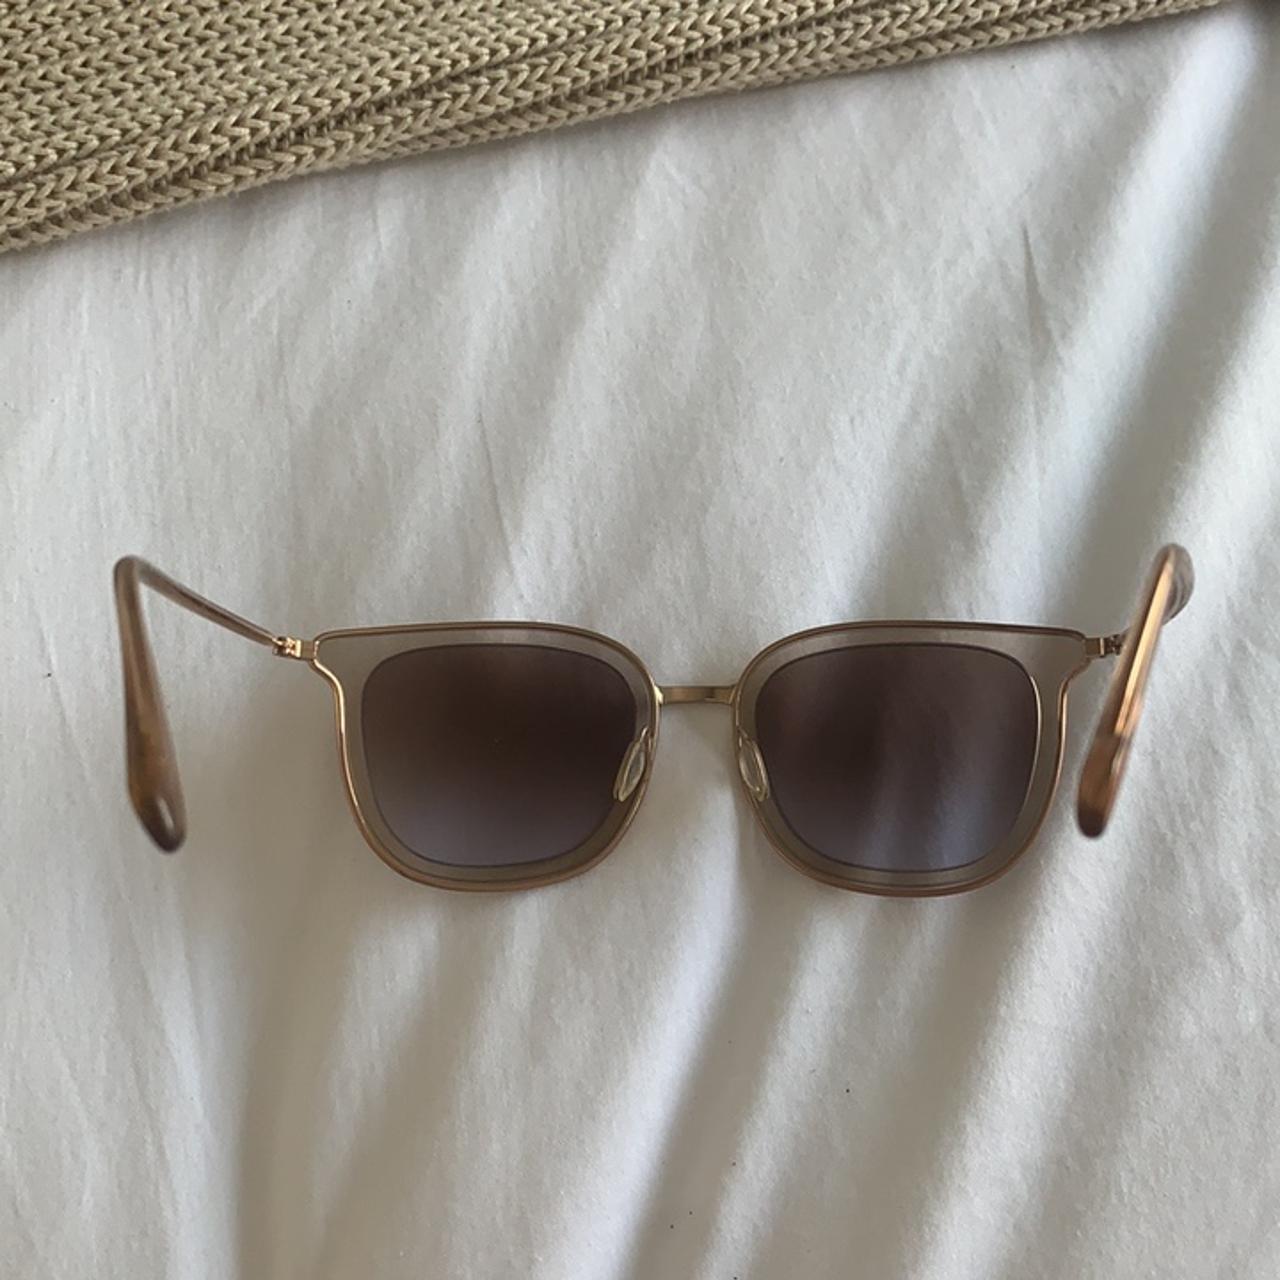 Oliver Peoples Women's Pink and Gold Sunglasses (2)